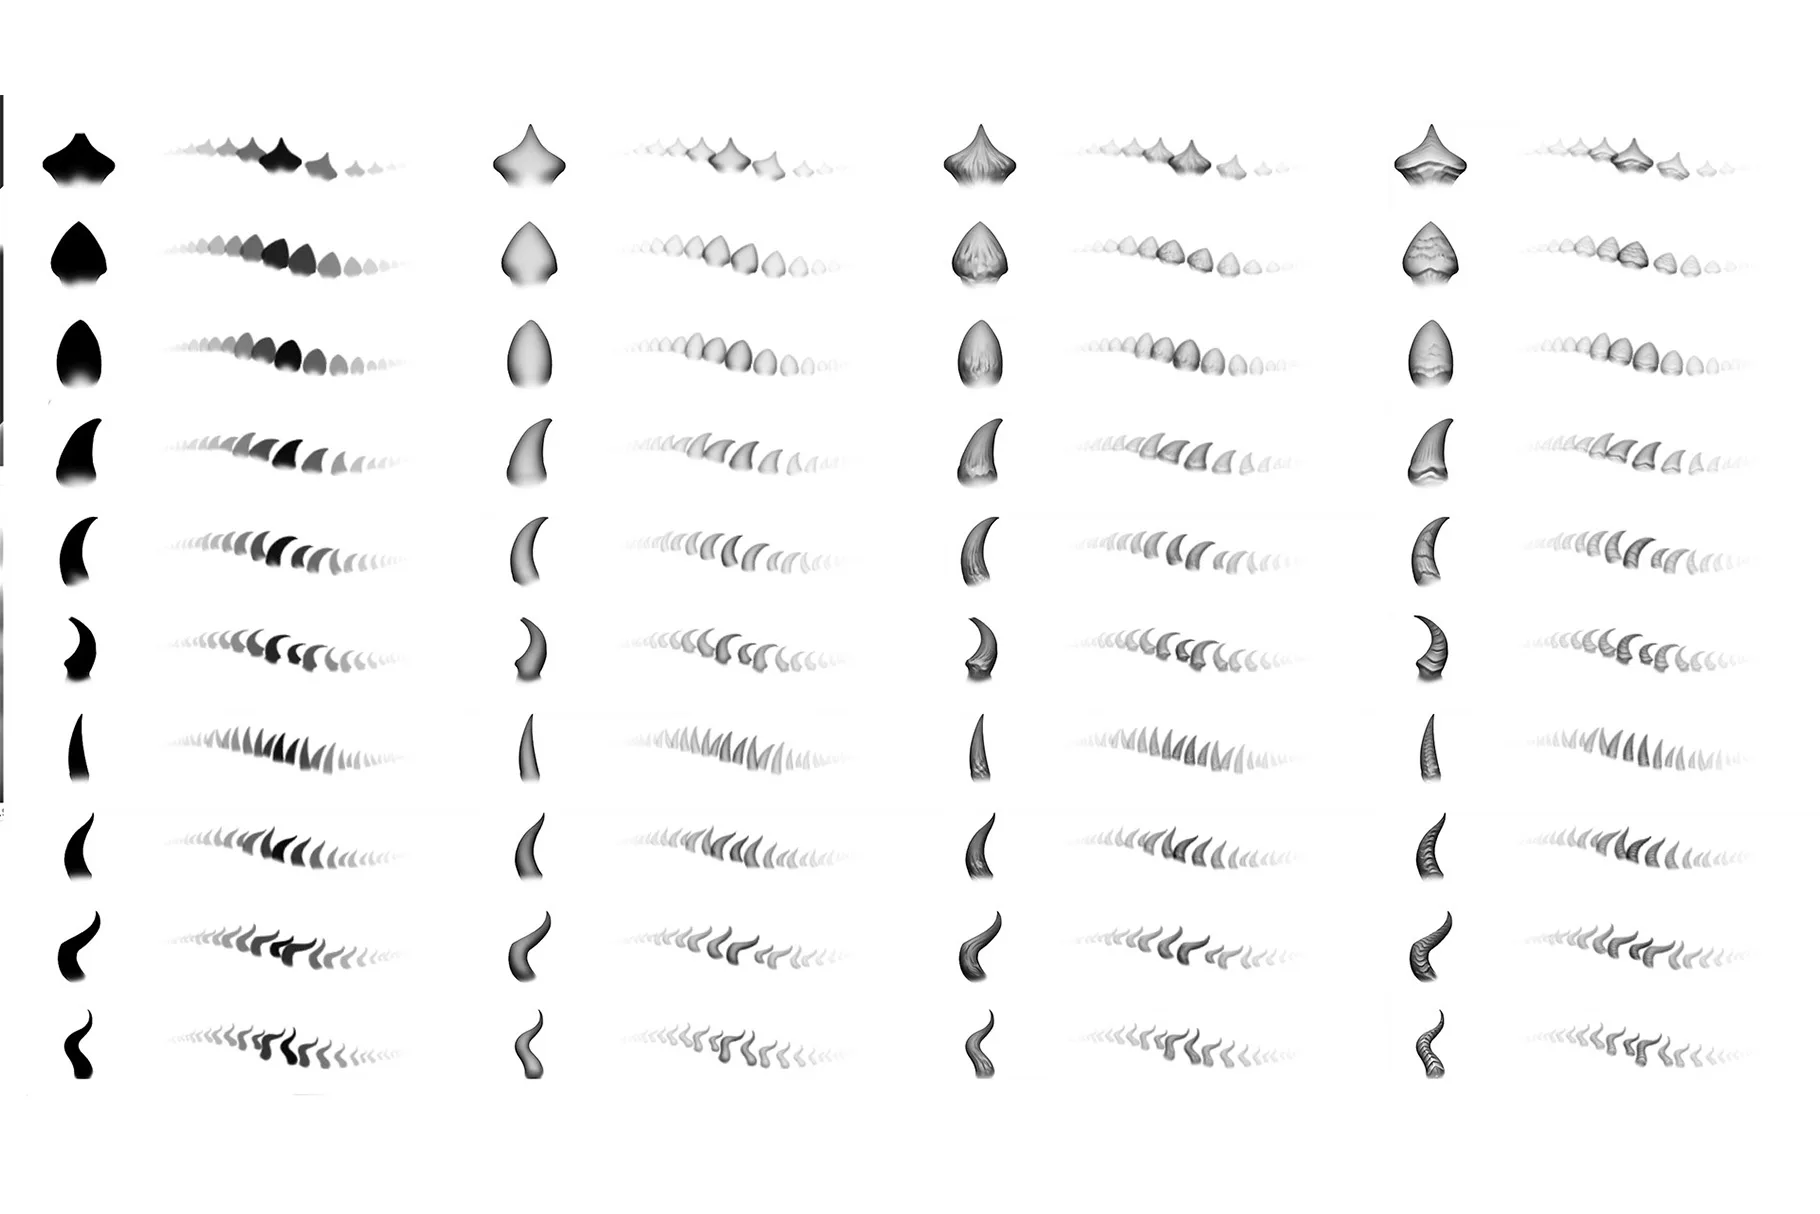 Horns and Spikes Brush Set